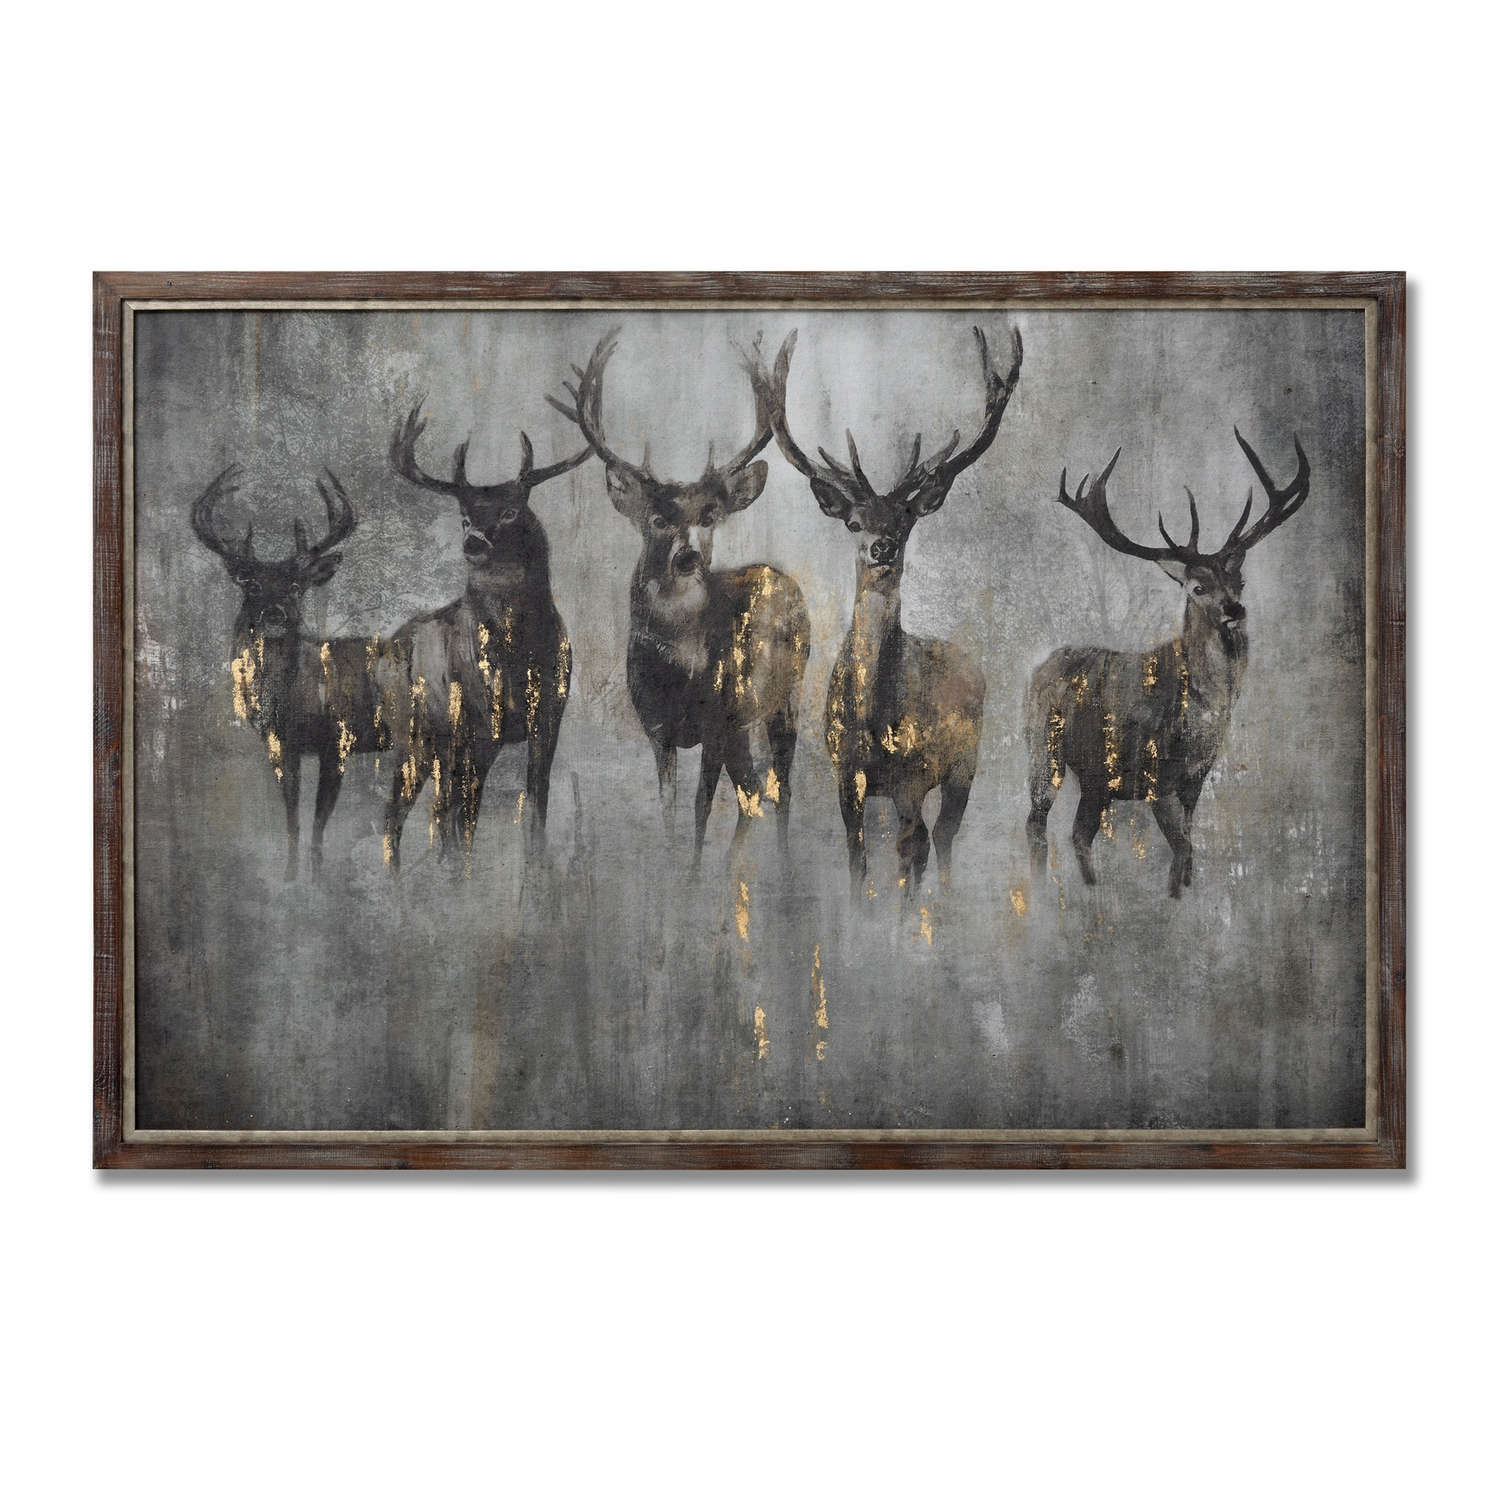 Large Curious Stag Painting on Cement Board with Frame - Image 1